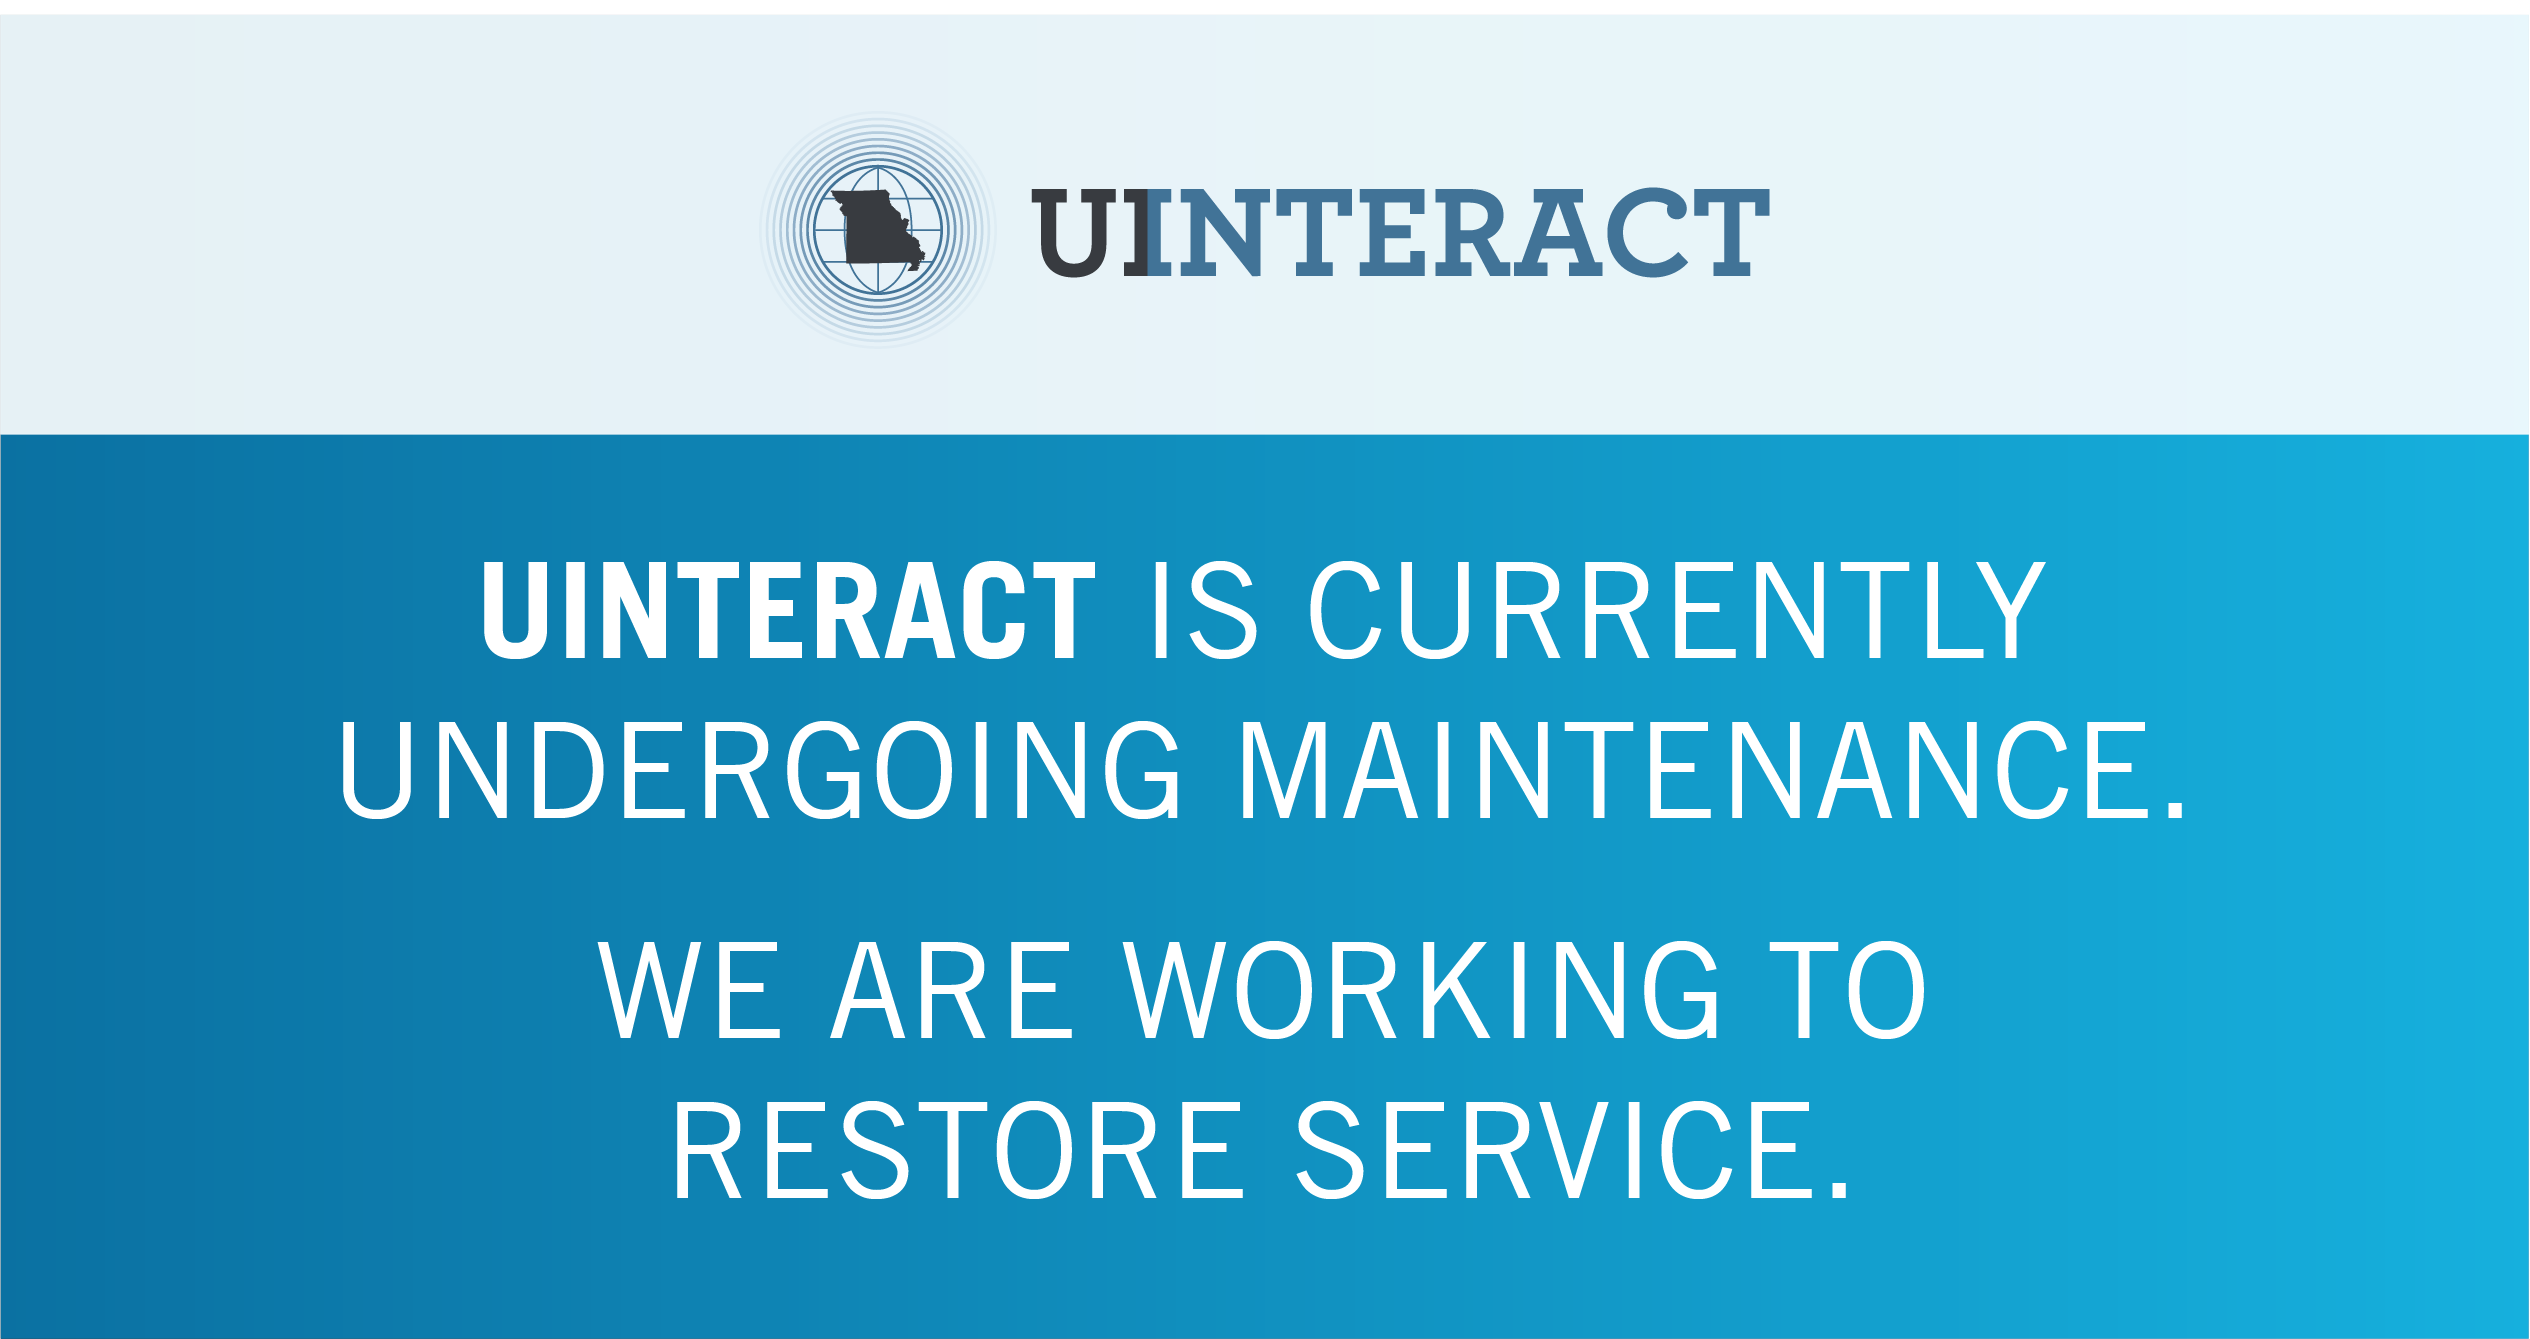 UInteract is currently undergoing maintenance. We are working to restore service.